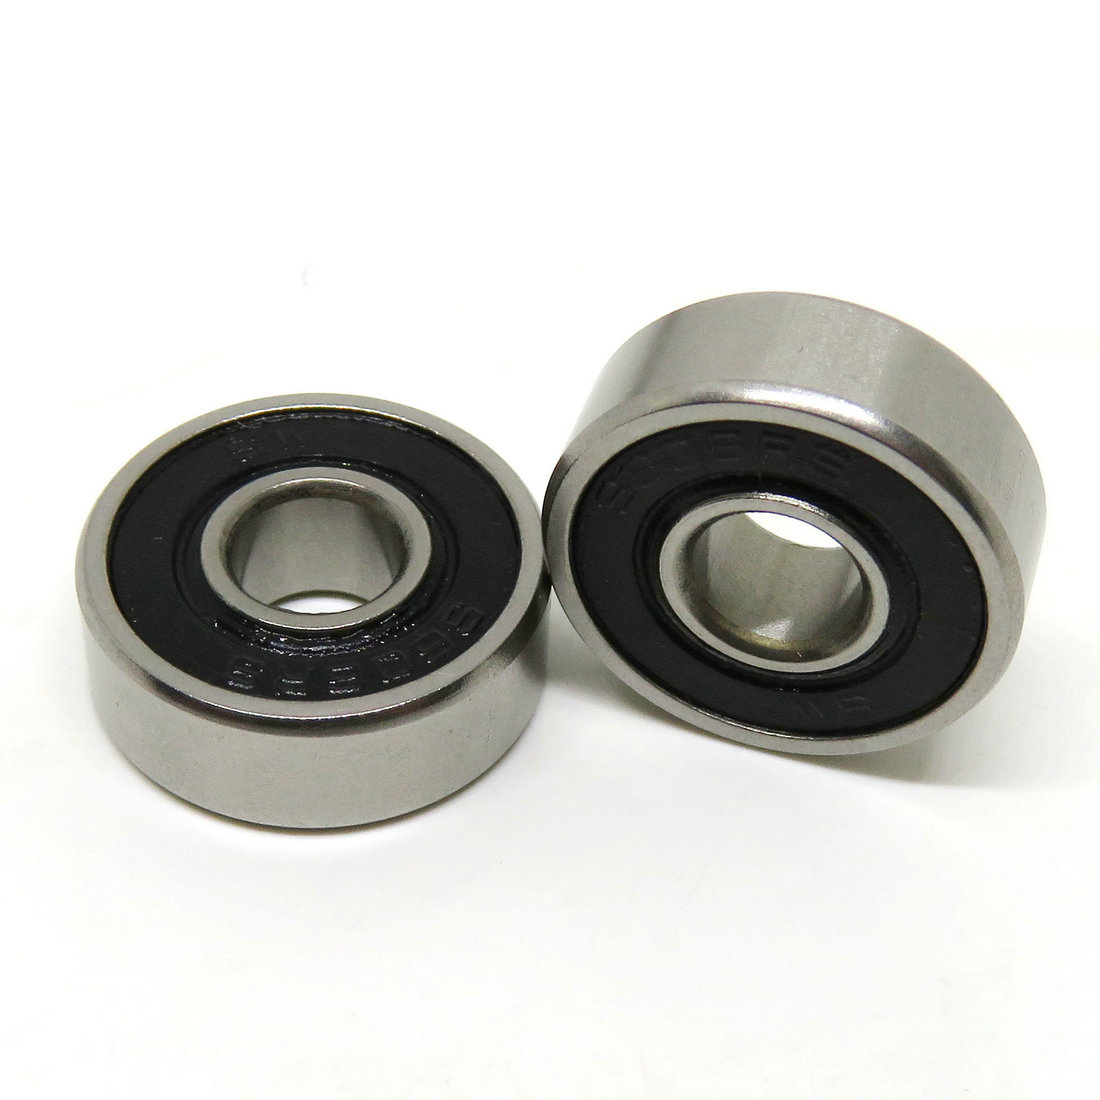 Power Transmission Products S605RS 6x17x7mm Rubber Sealed Stainless Steel Ball Bearing S605 2RS.jpg